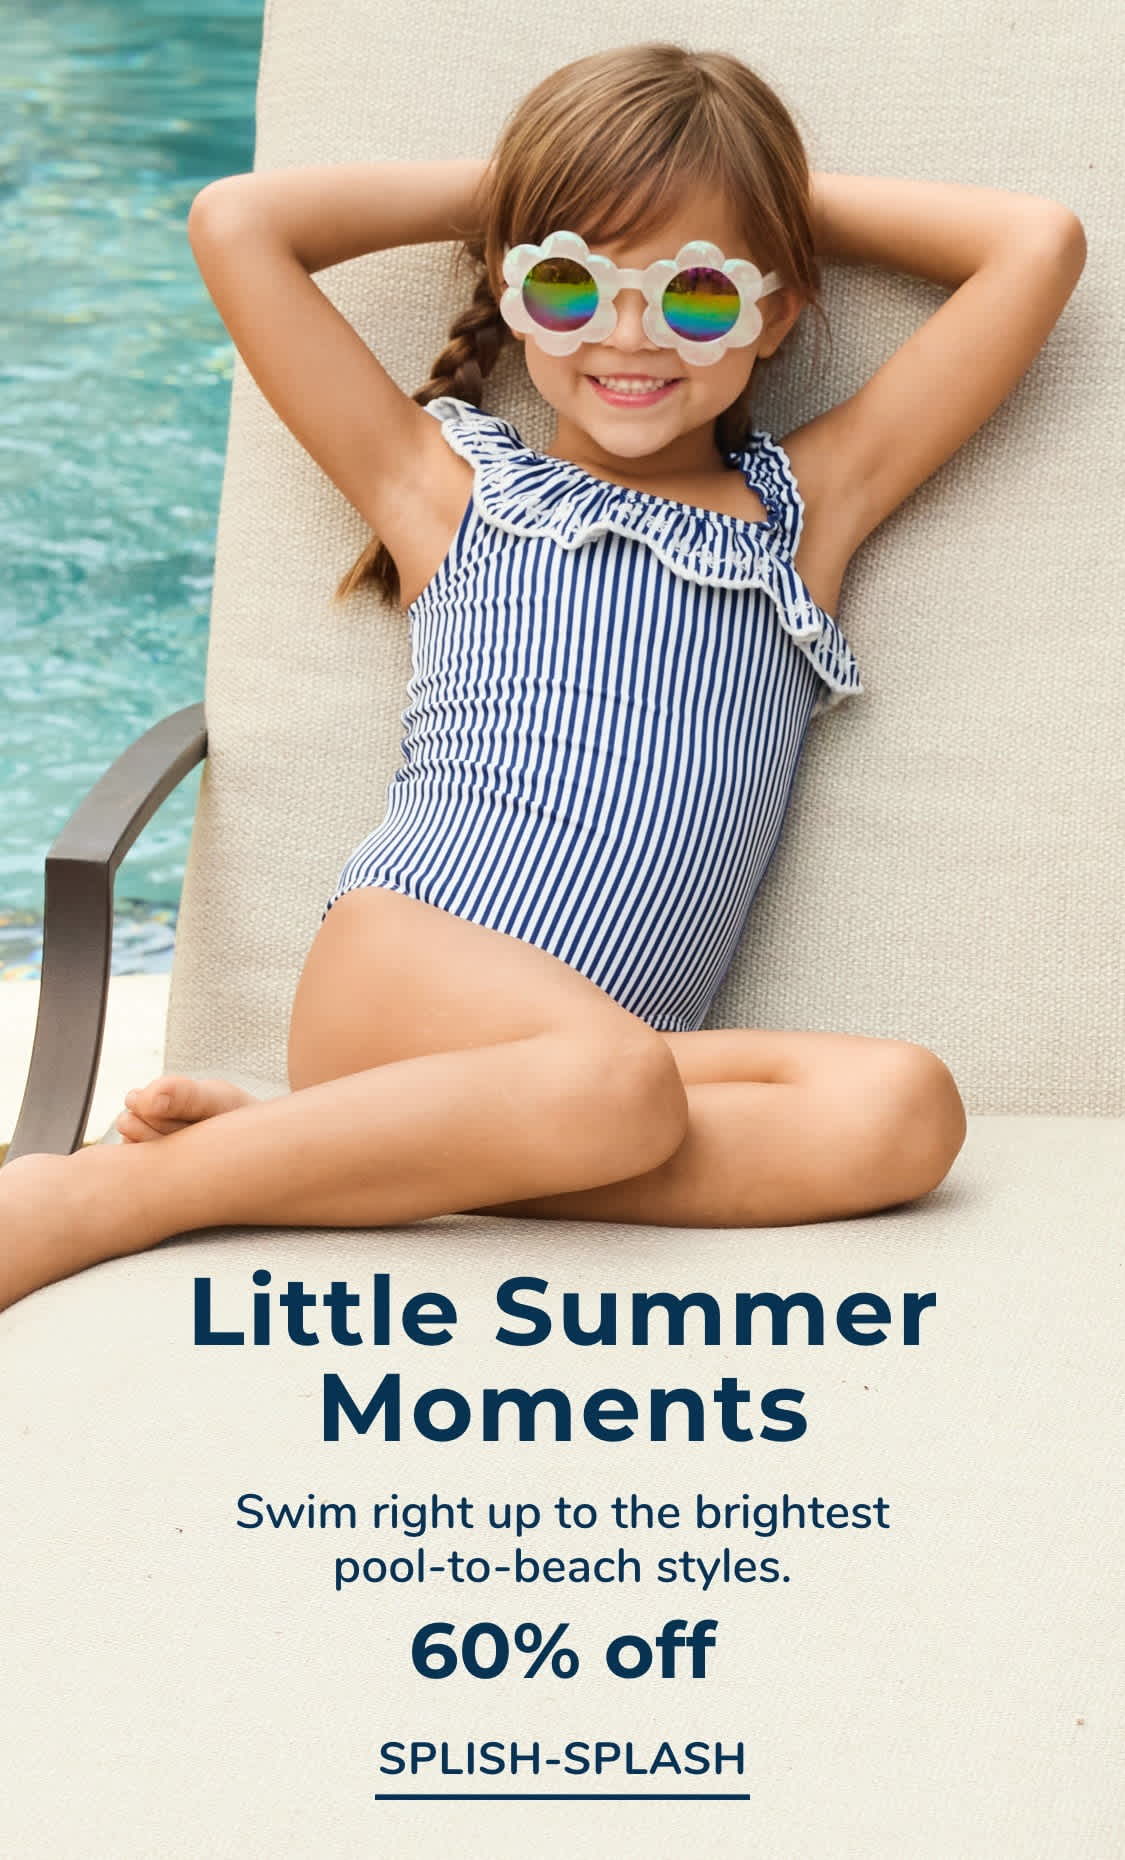 Little Summer Moments Swim right up to the brightest pool-to-beach styles.